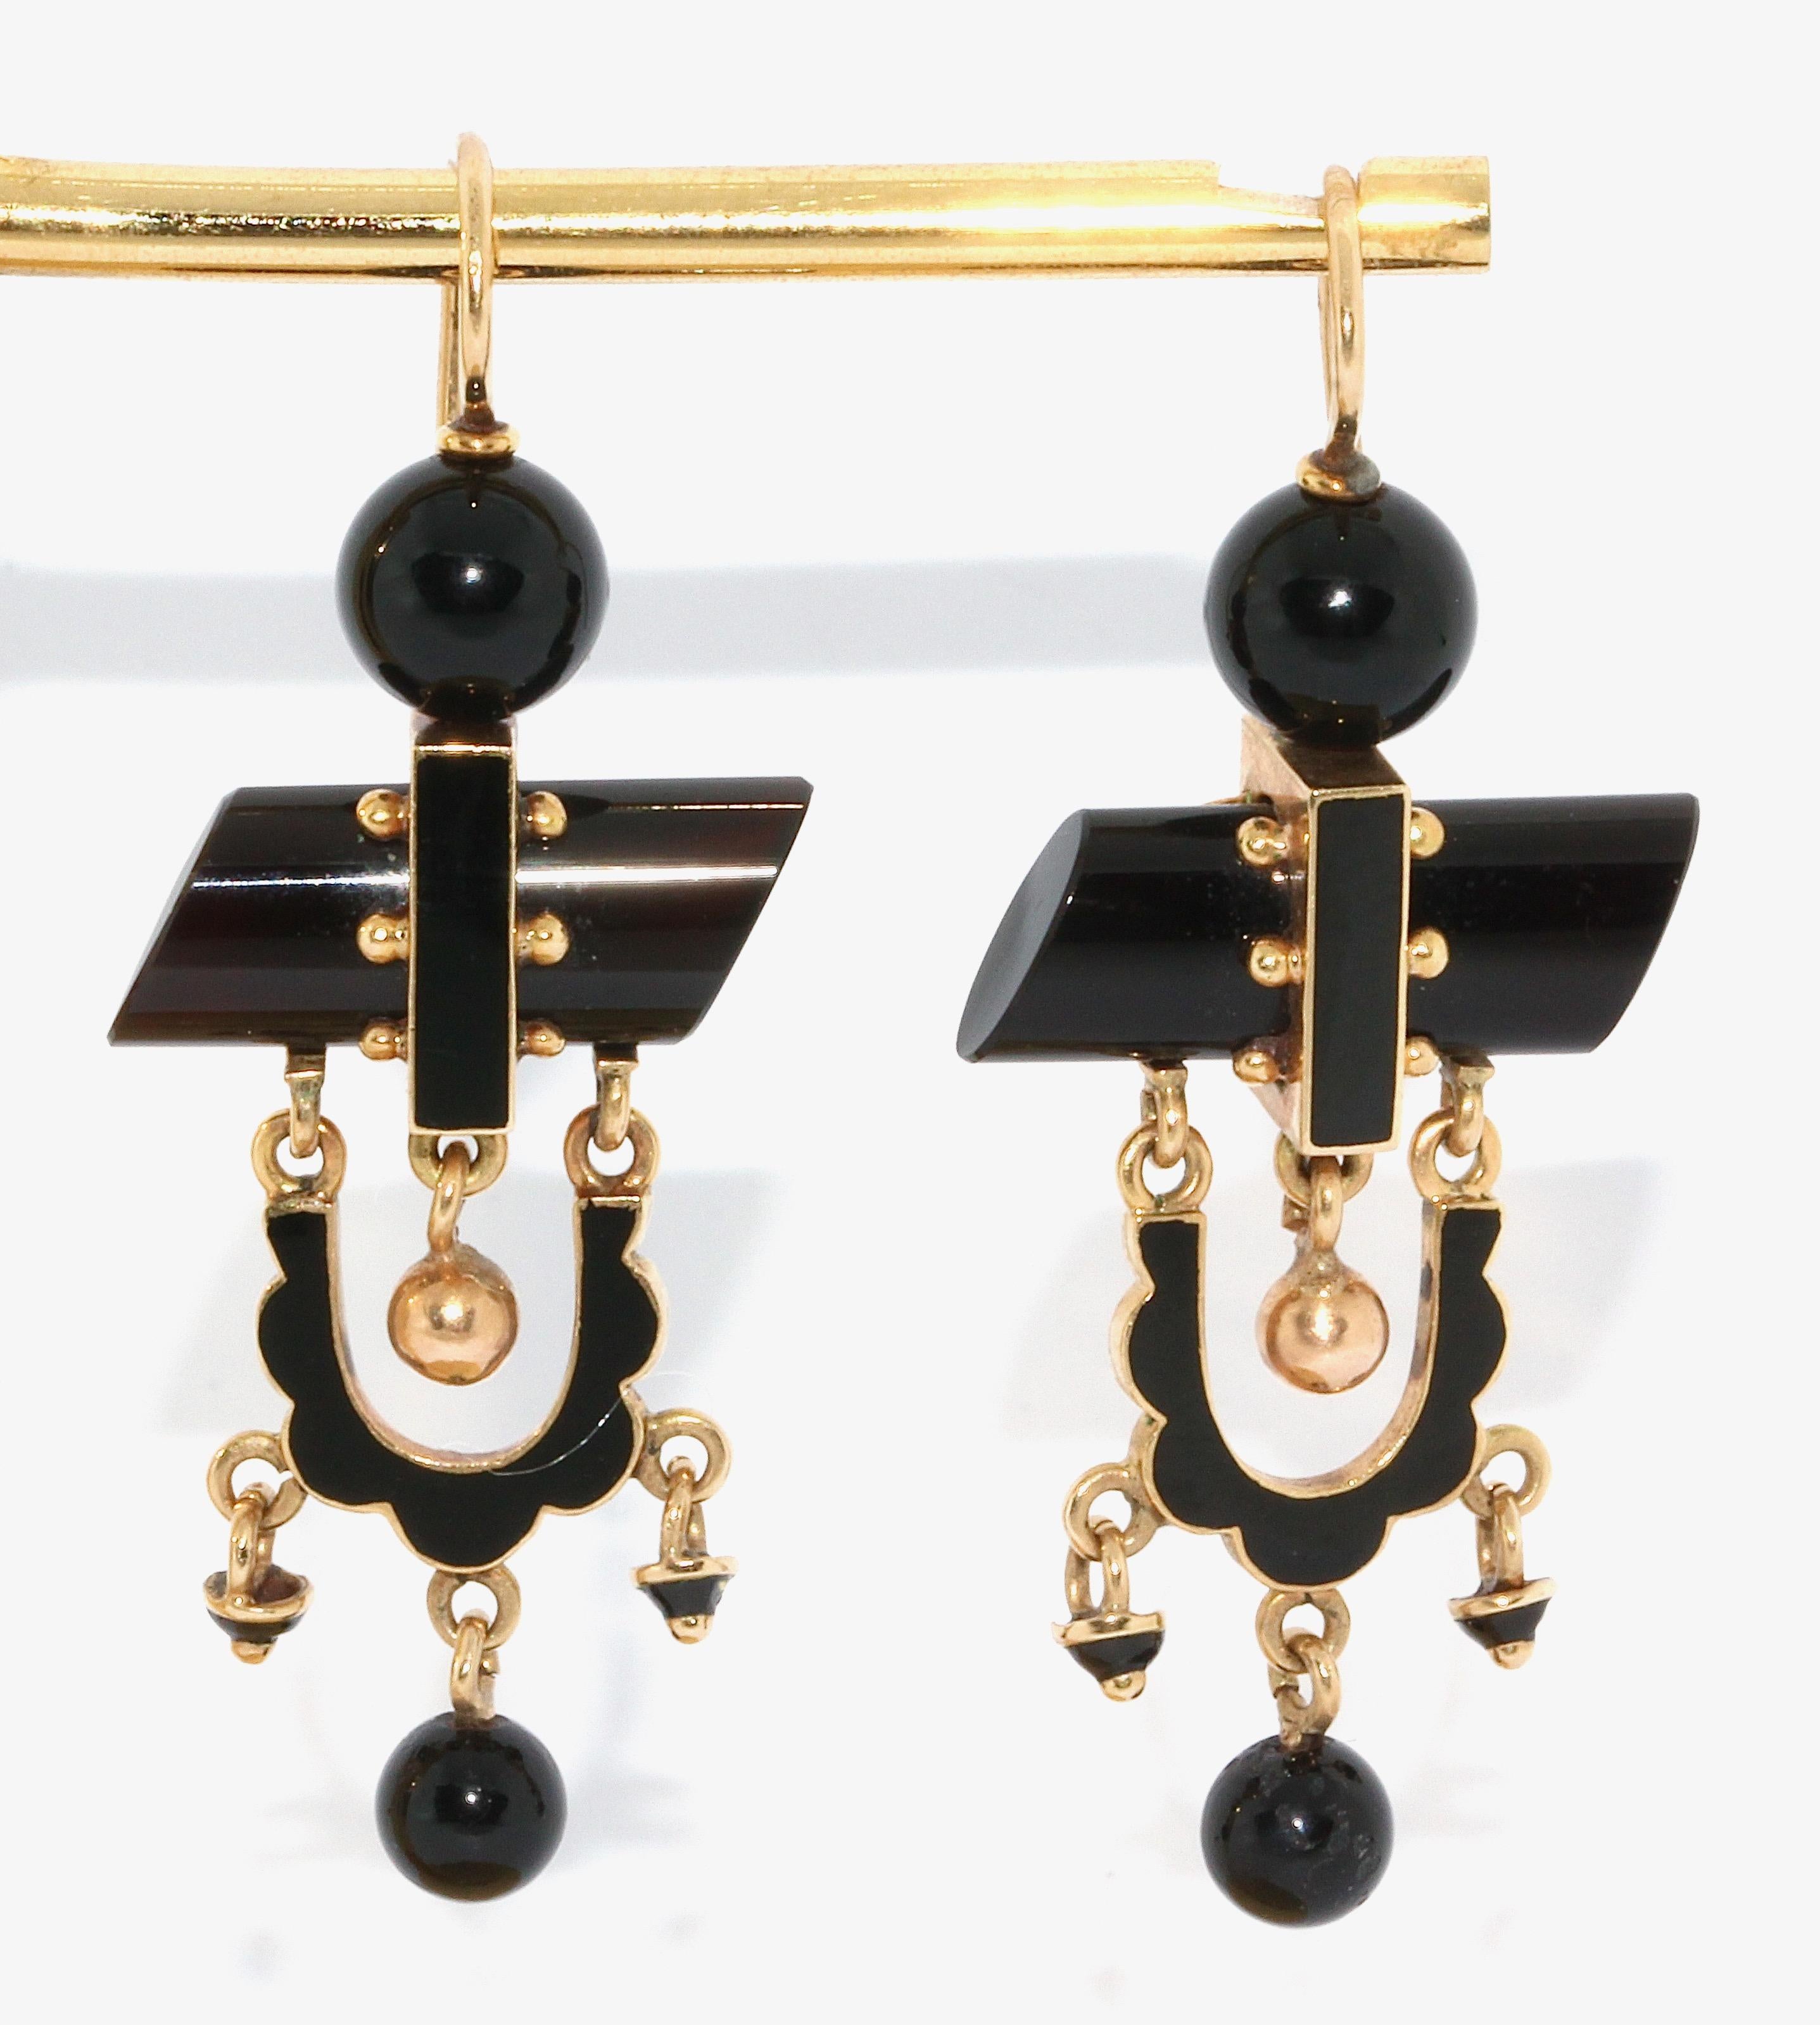 Antique, historical, onyx gold stud earrings. With black enamel.

No damages.
Including certificate of authenticity.

We have the matching large onyx pendant on offer.